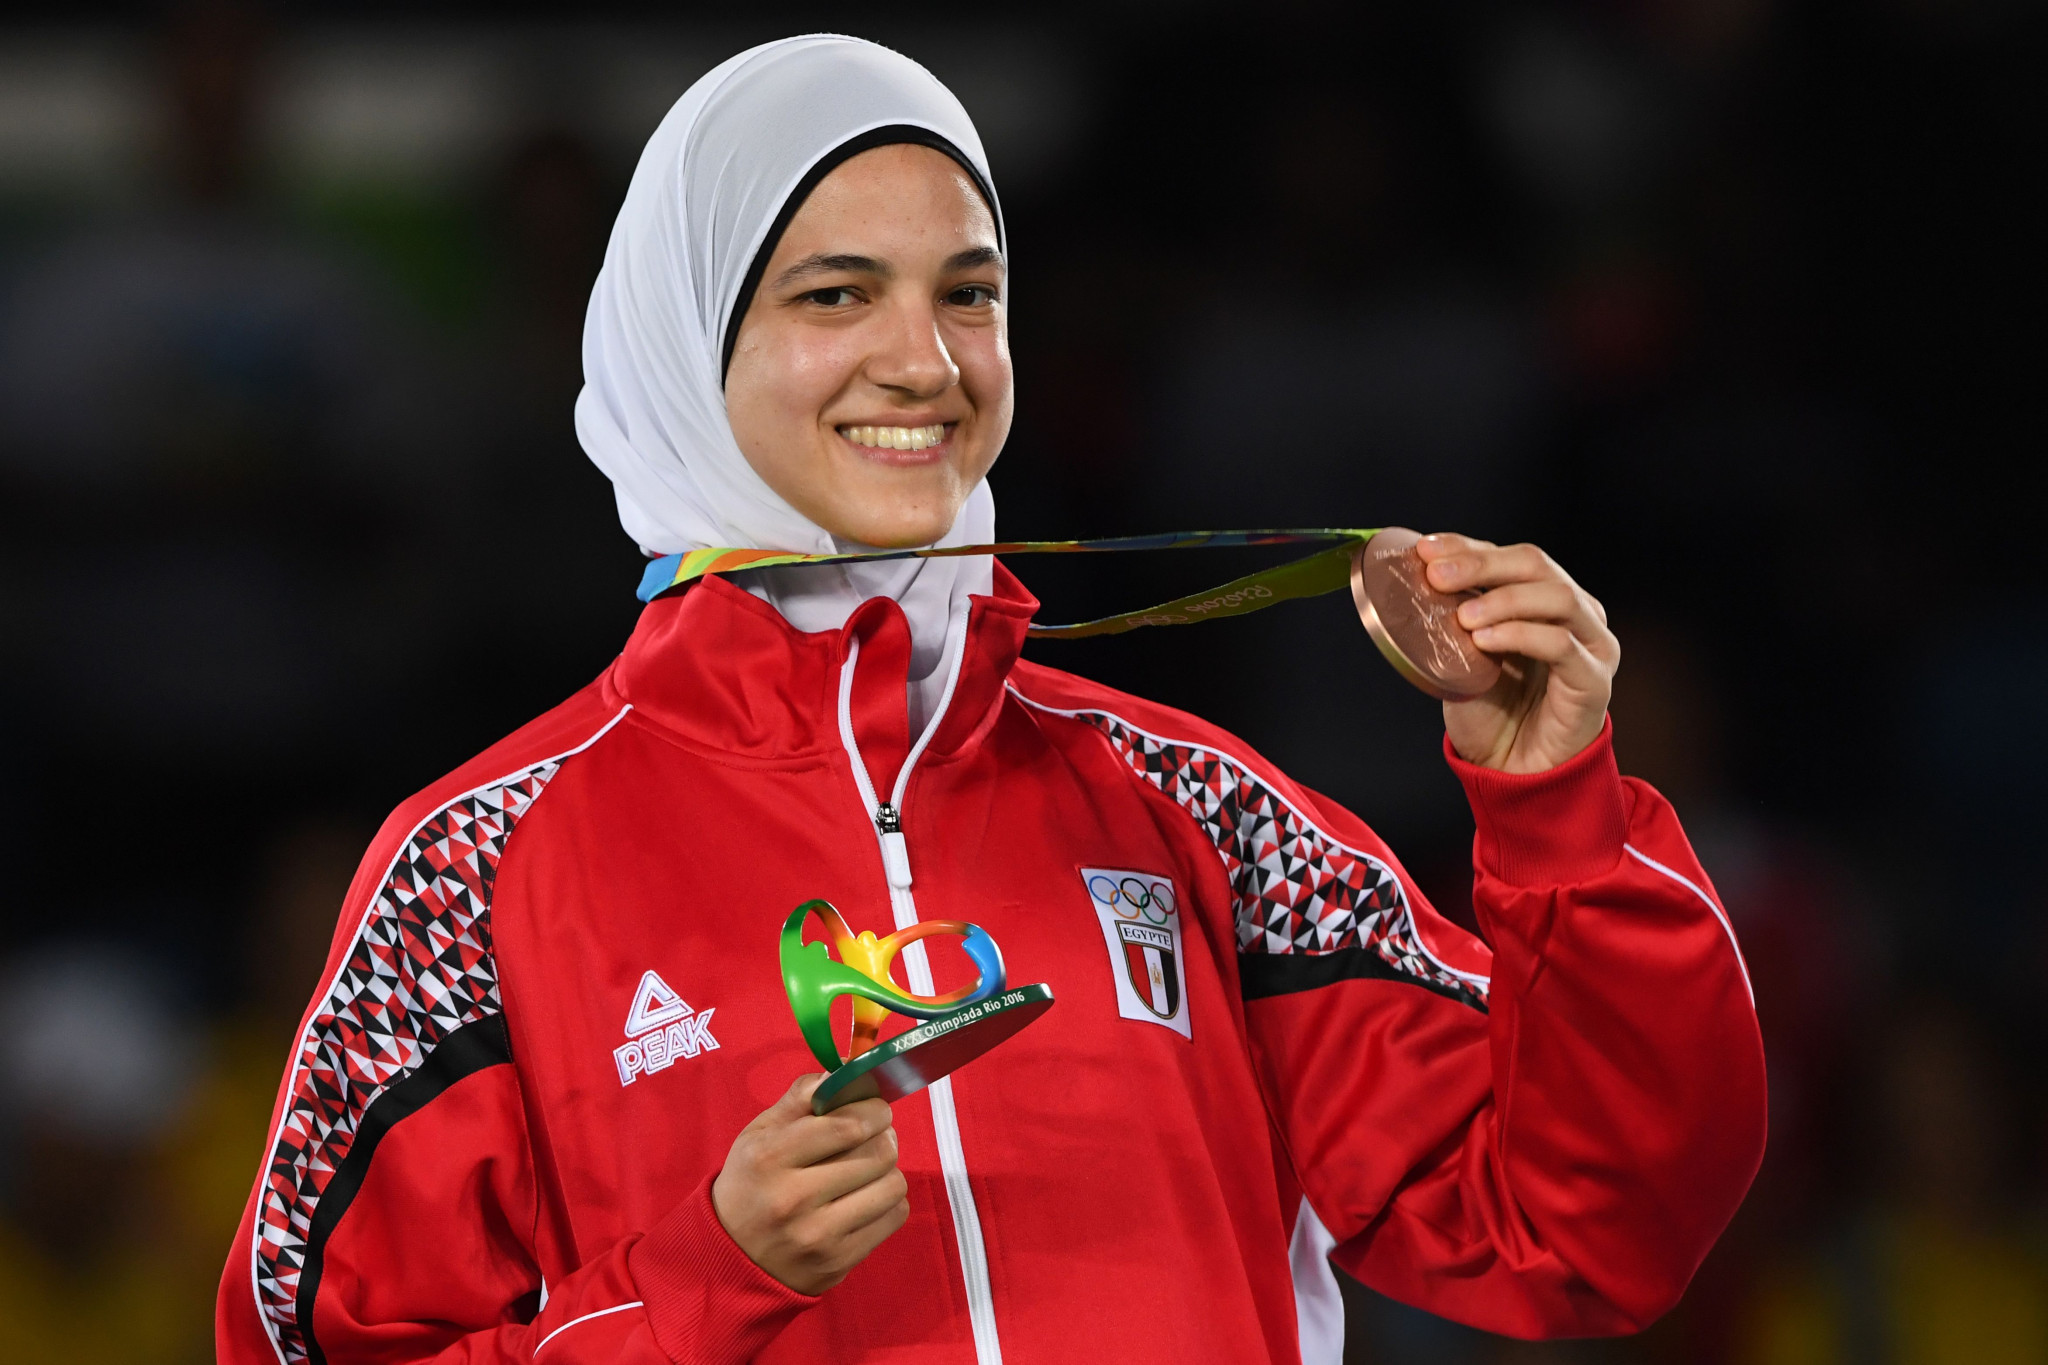 Egypt's Hedaya Malak Wahba, a candidate for the World Taekwondo Athletes' Committee, won the Olympic bronze medal in the under-57kg category at Rio 2016 ©Getty Images